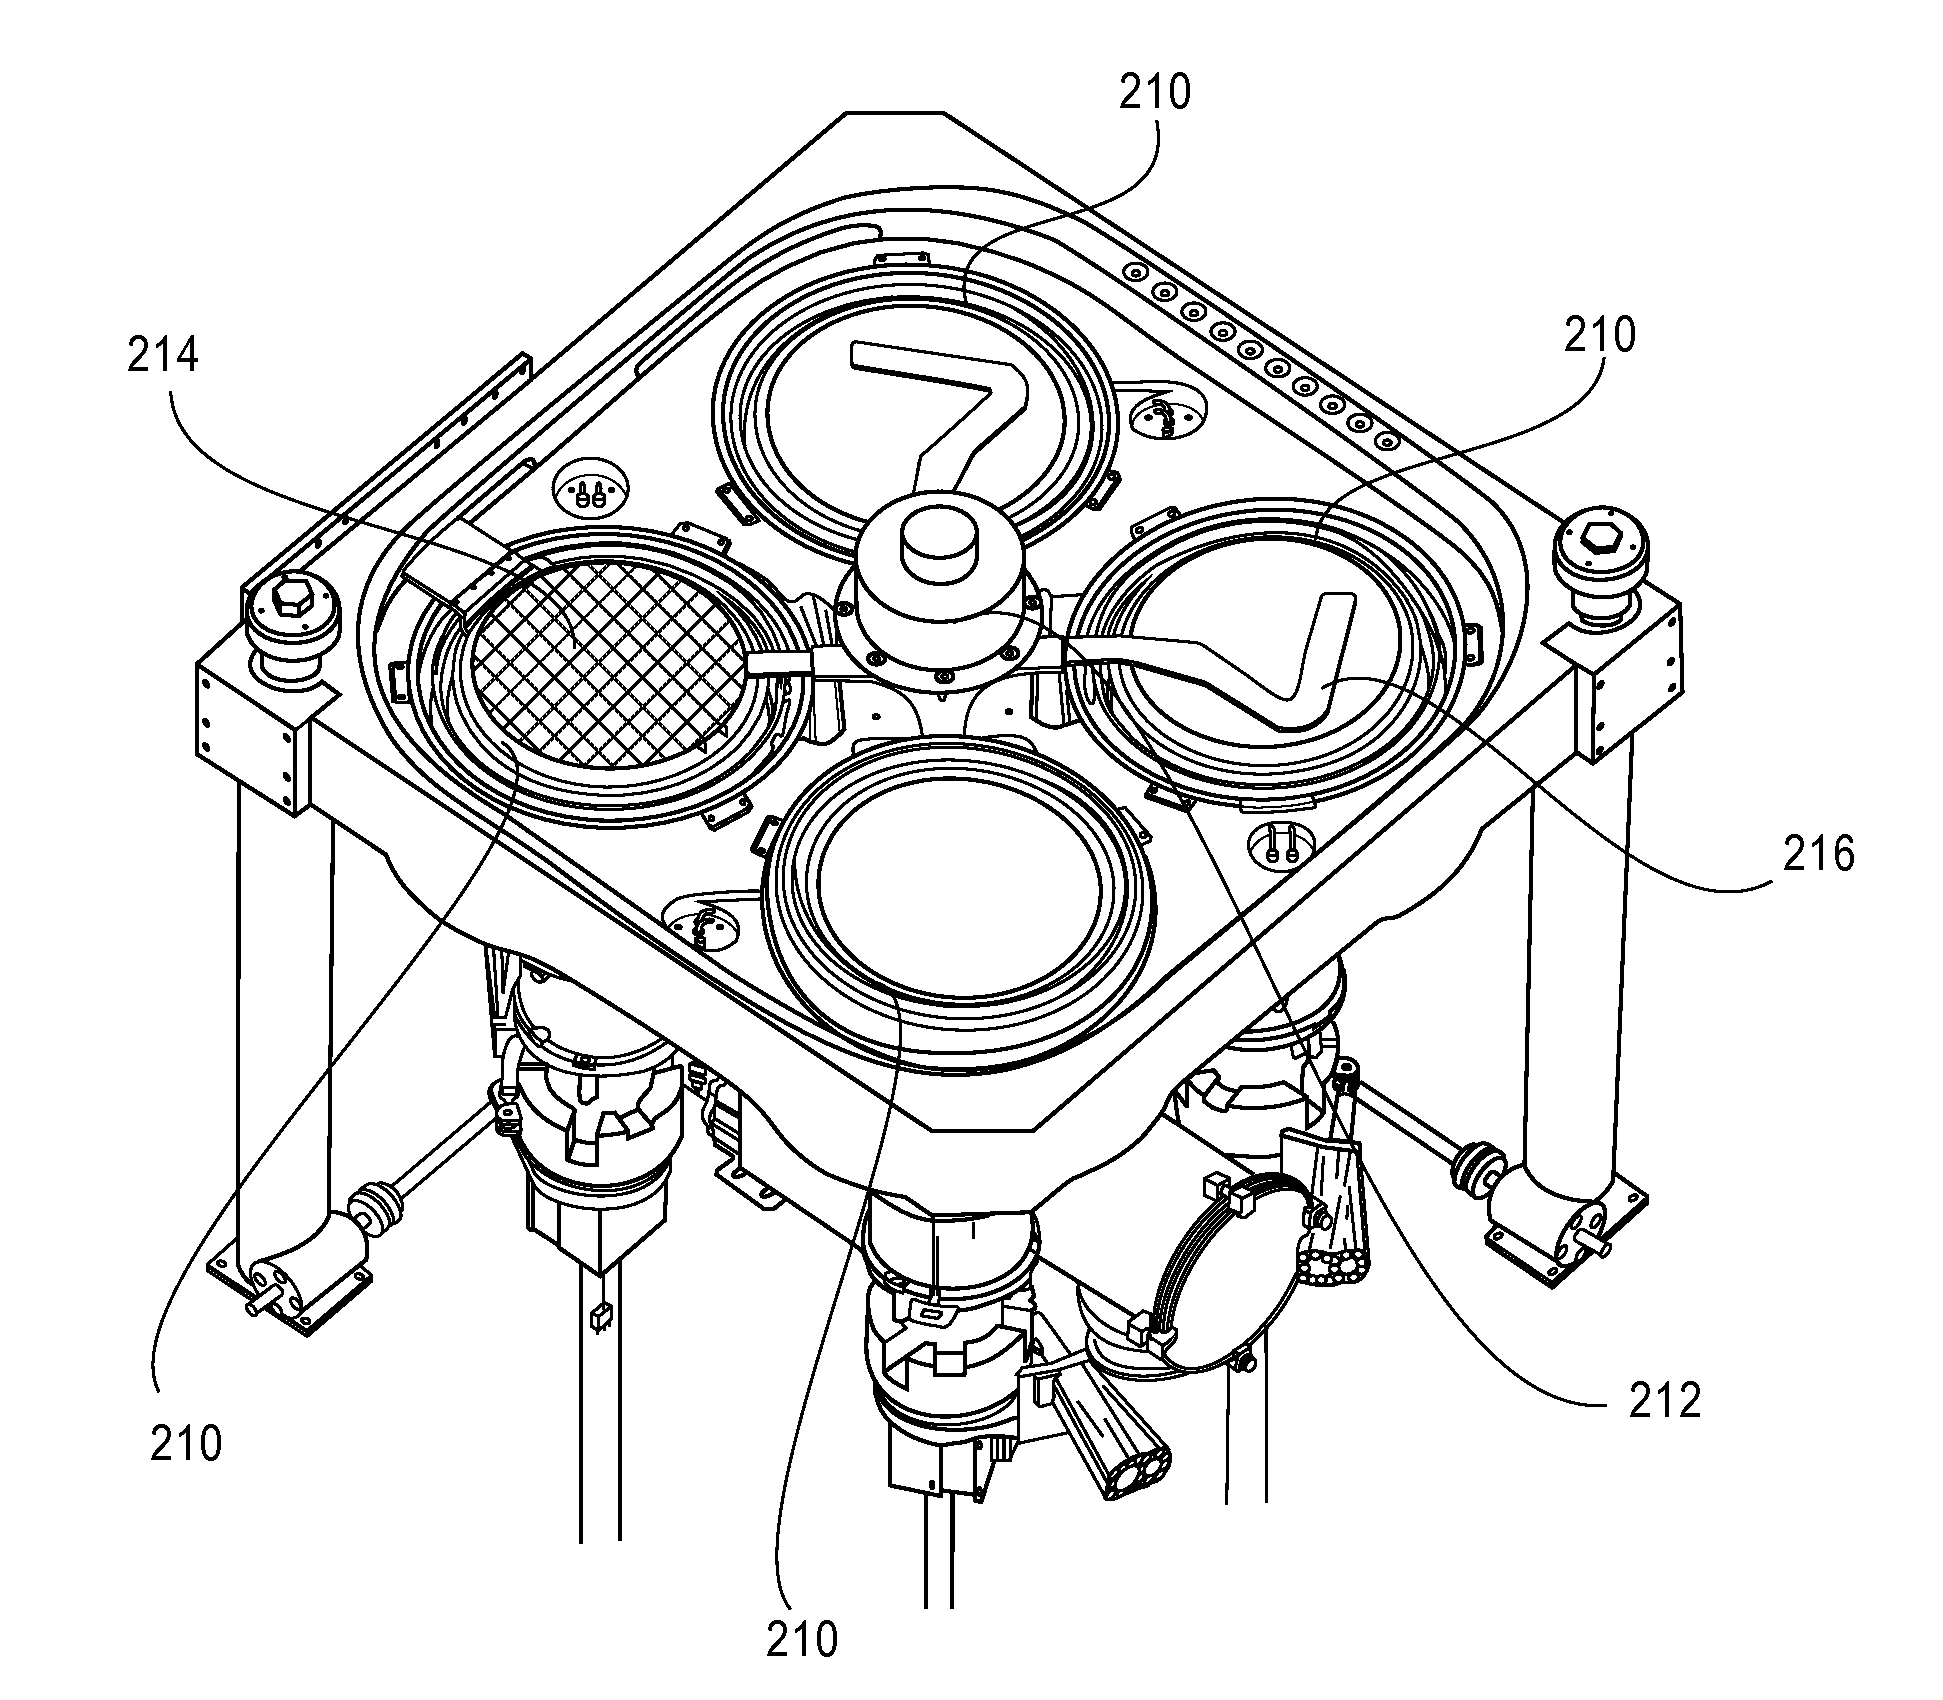 Isolation for multi-single-wafer processing apparatus